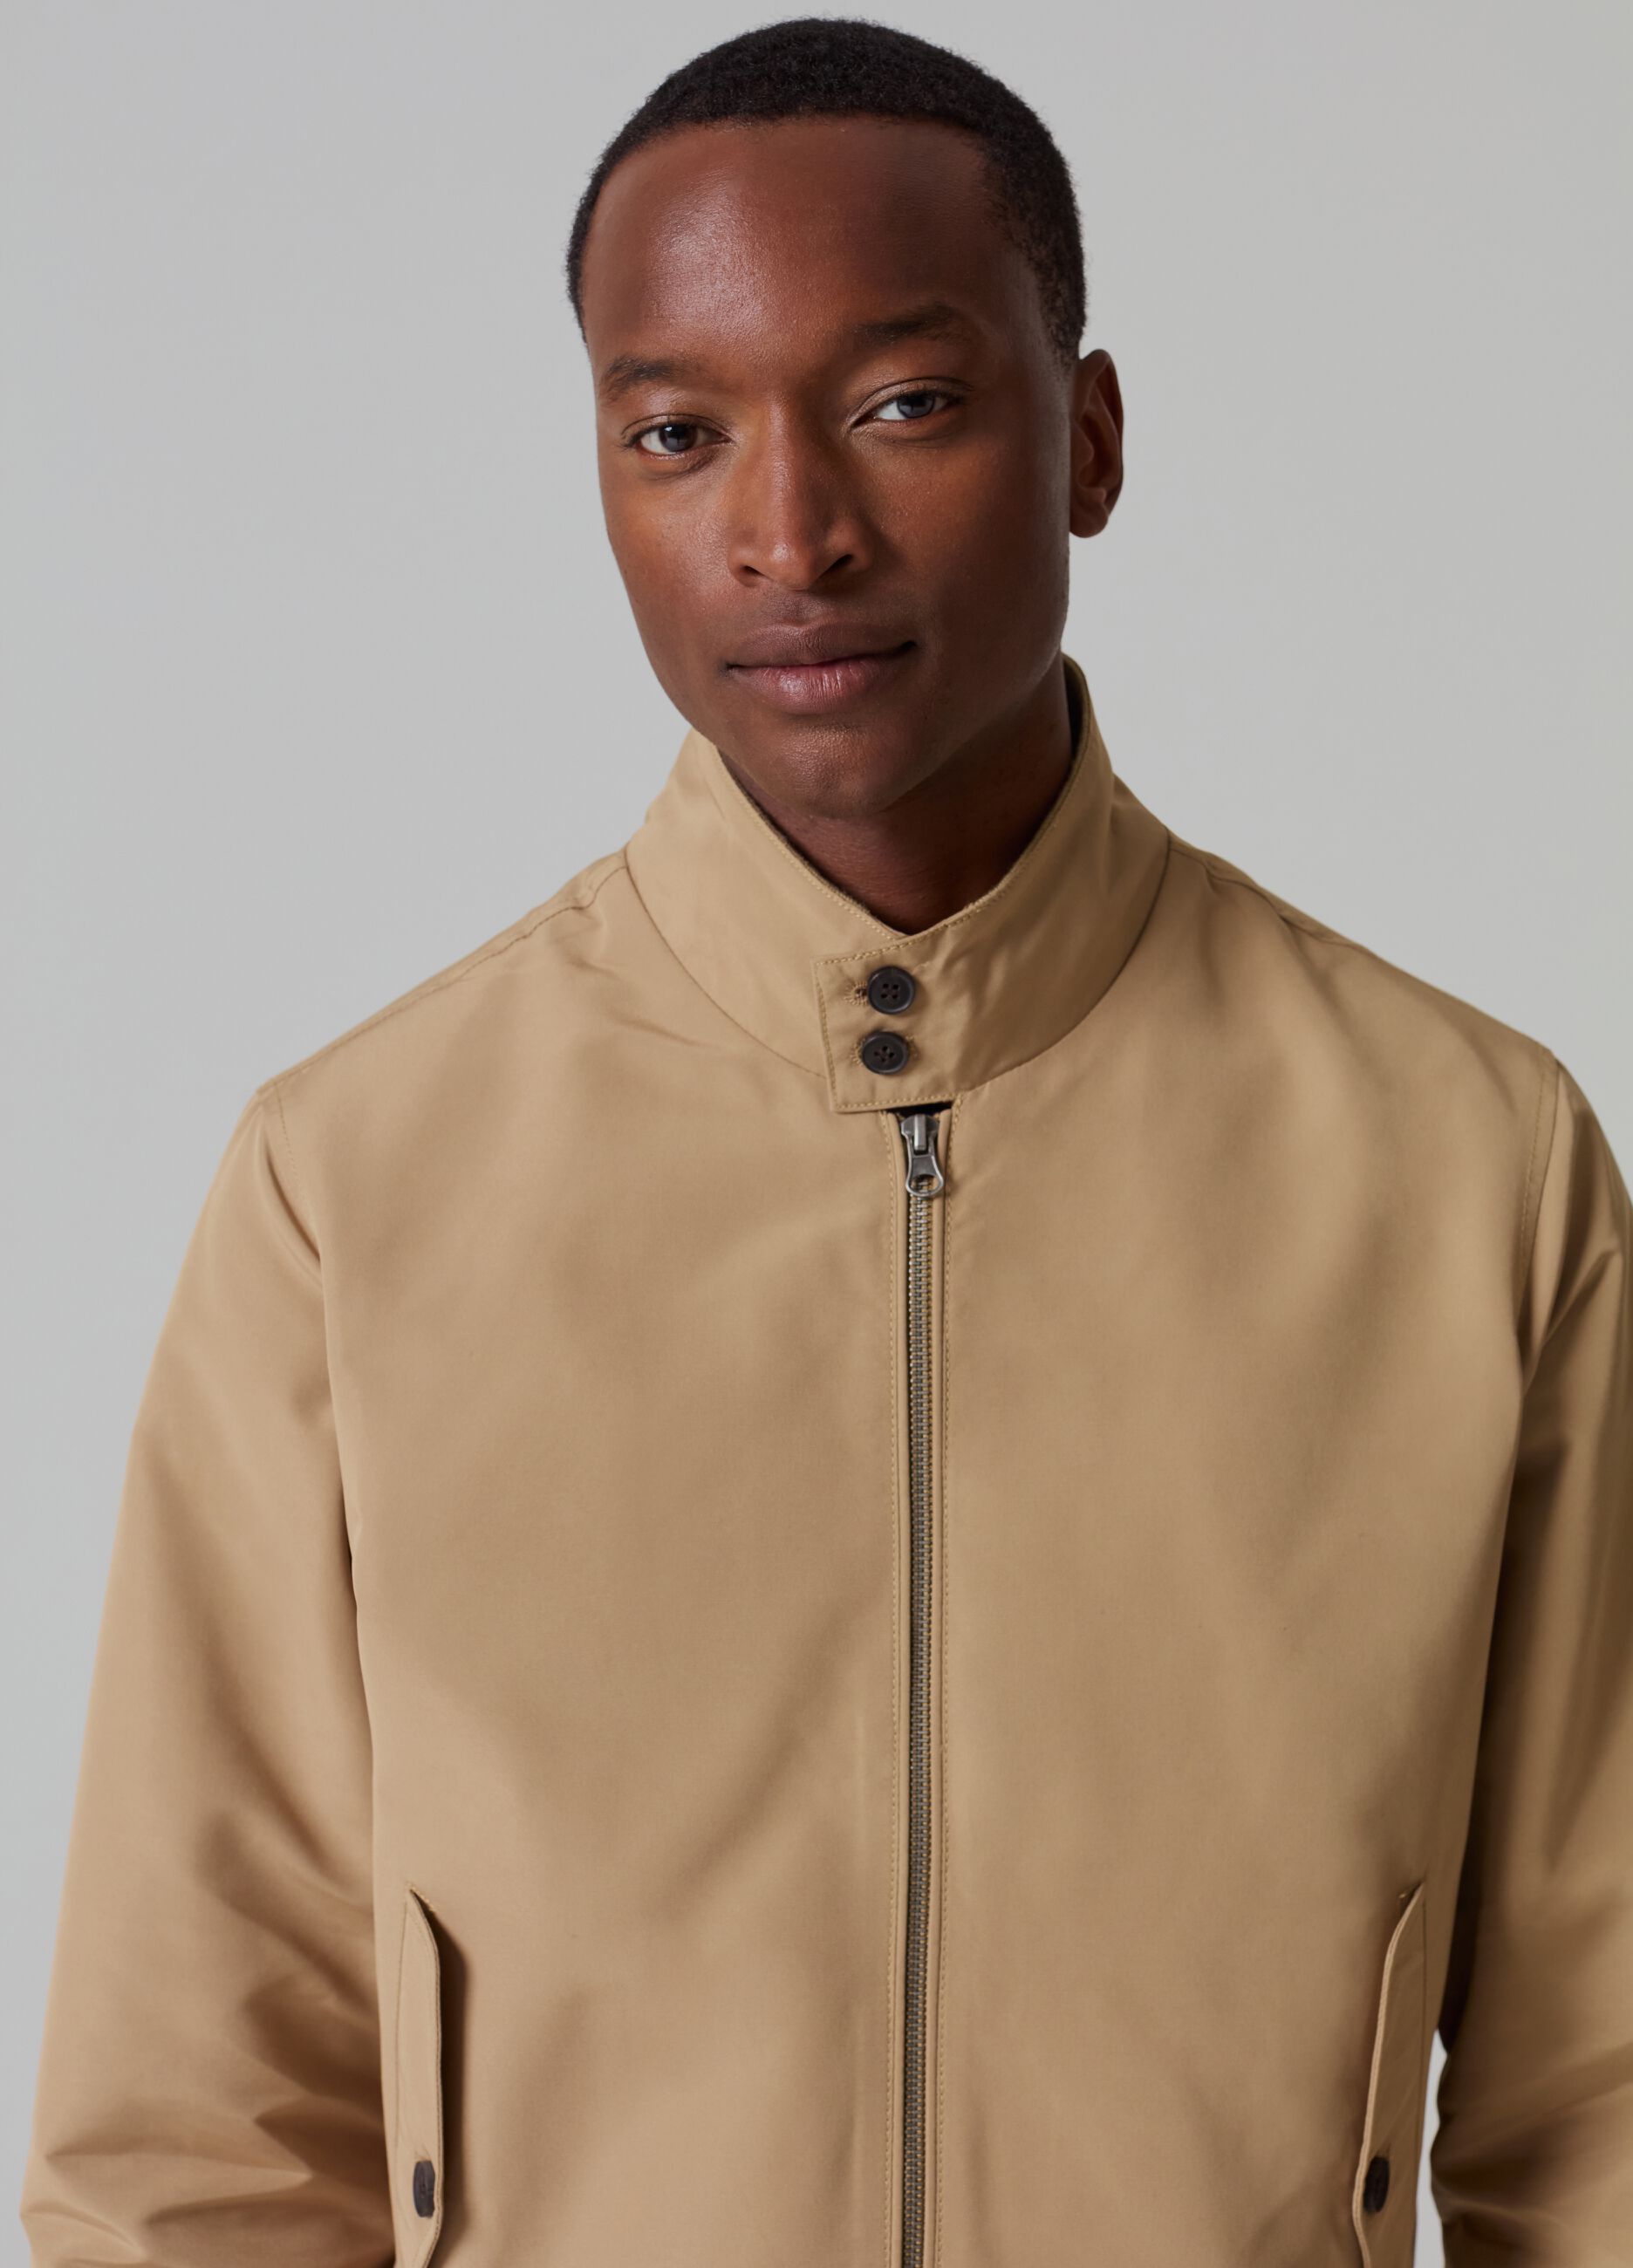 Full-zip bomber jacket with high neck and buttons